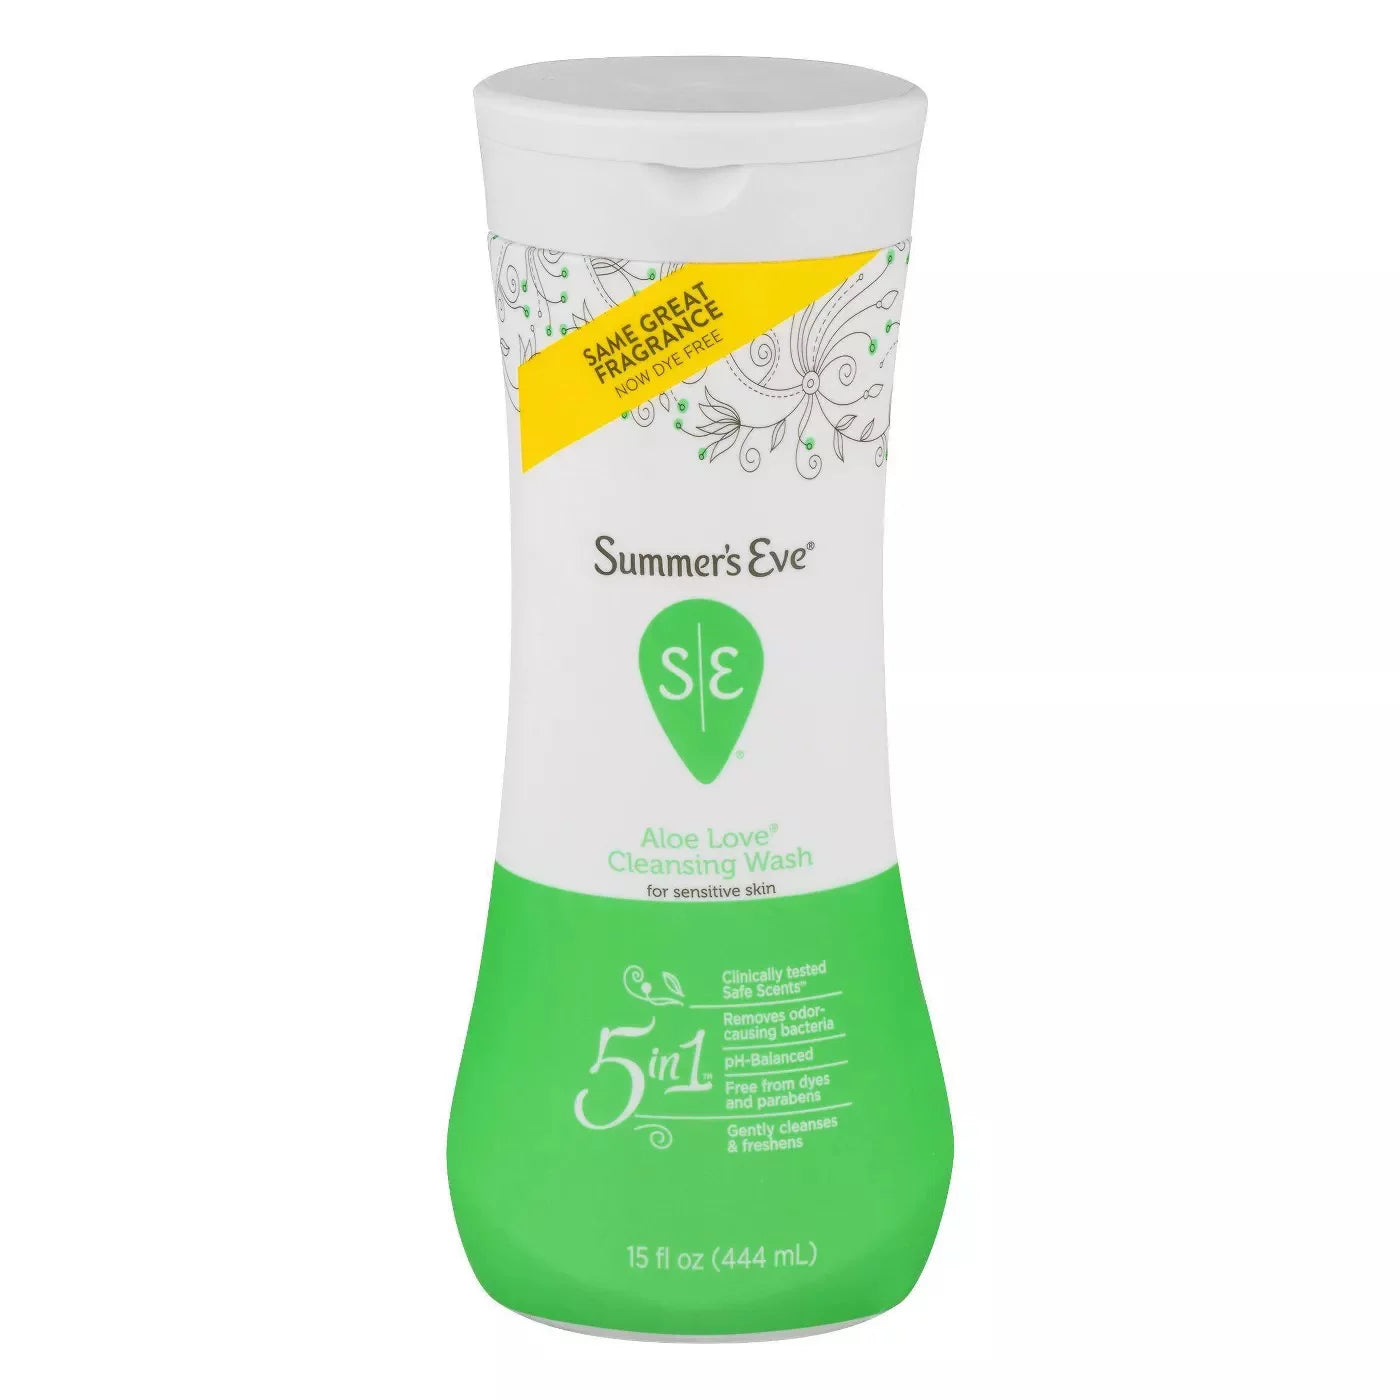 SUMMER’S EVE ALOE LOVE CLEANSING WASH